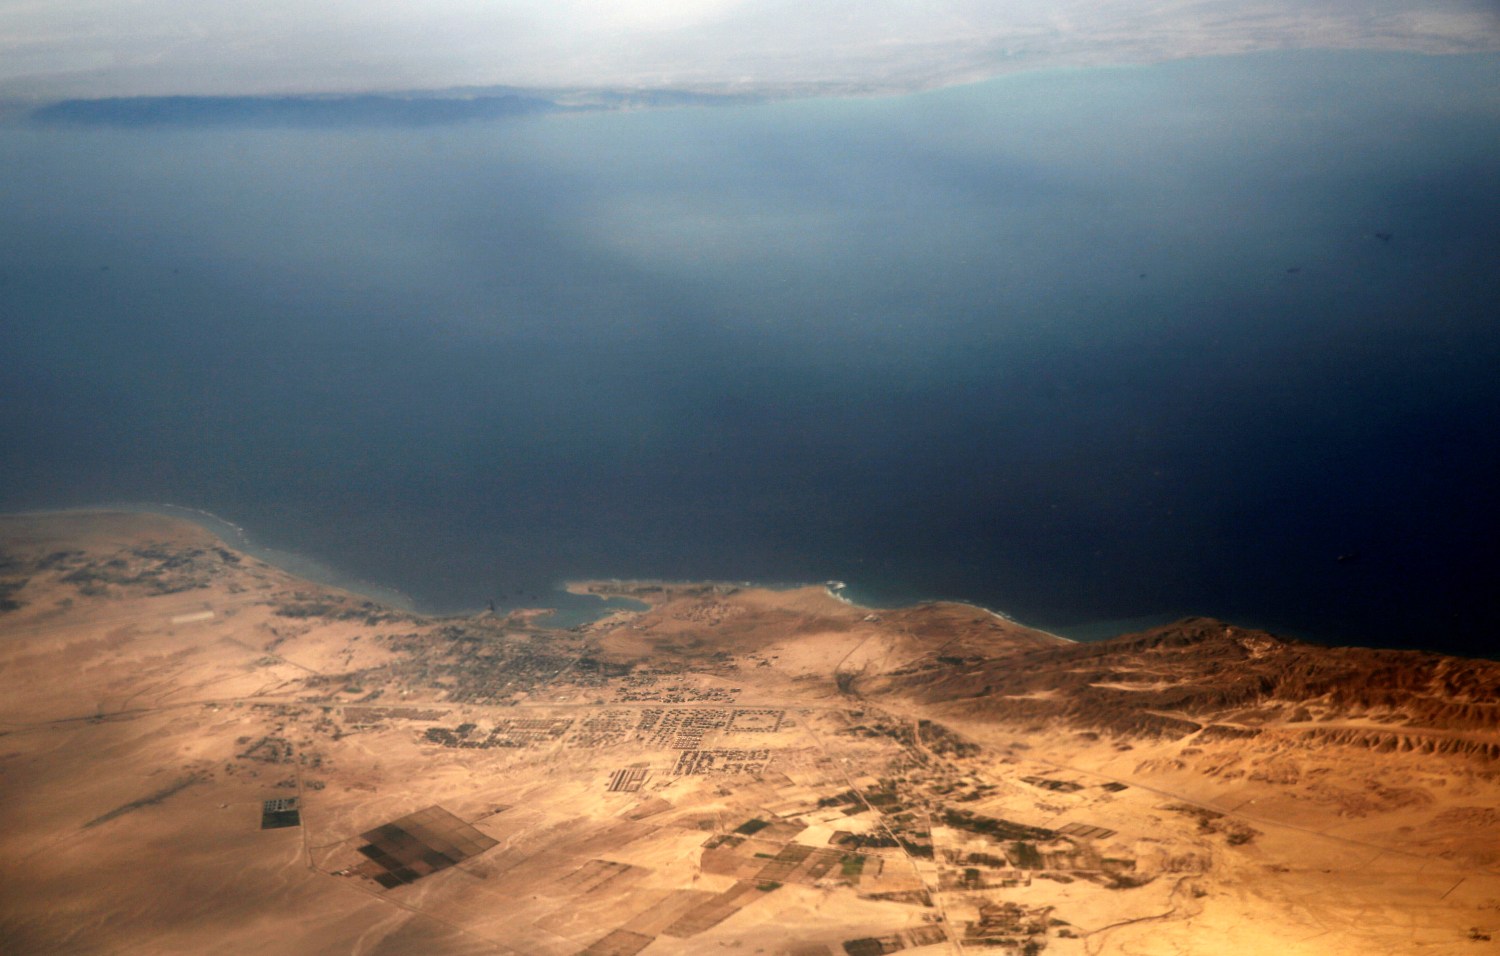 An aerial view of the coast of the Red Sea and the two islands of Tiran and Sanafir is pictured through the window of an airplane near Sharm el-Sheikh, Egypt November 1, 2016. Picture taken November 1, 2016. REUTERS/Amr Abdallah Dalsh - RC1B224A9E00